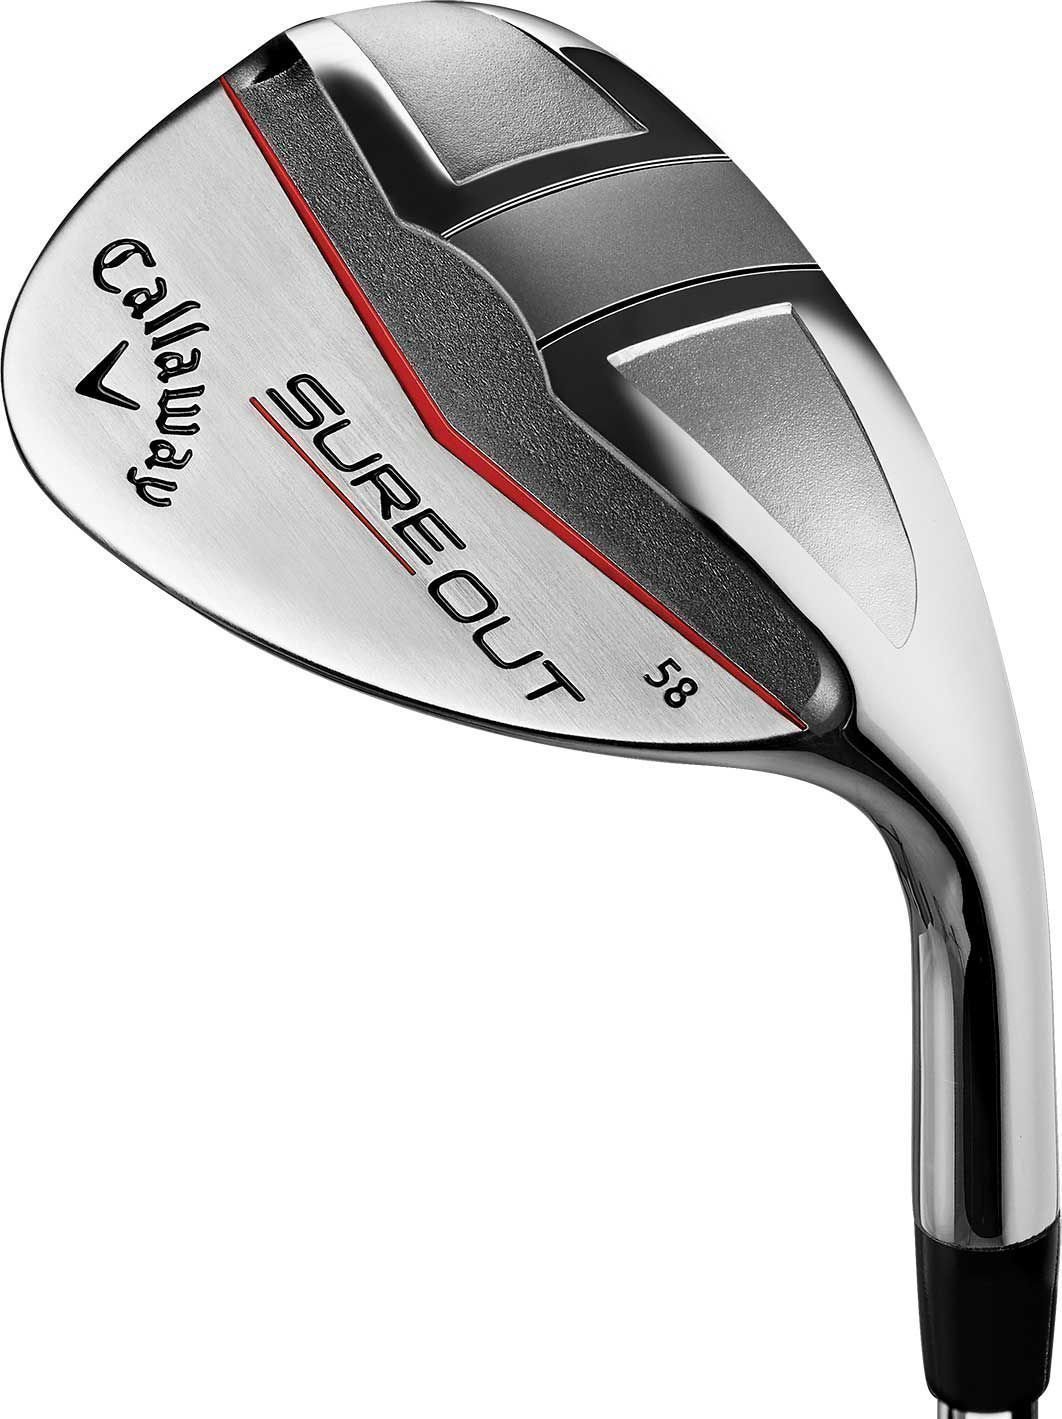 Palo de golf - Wedge Callaway Sure Out Wedge 64 Right Hand